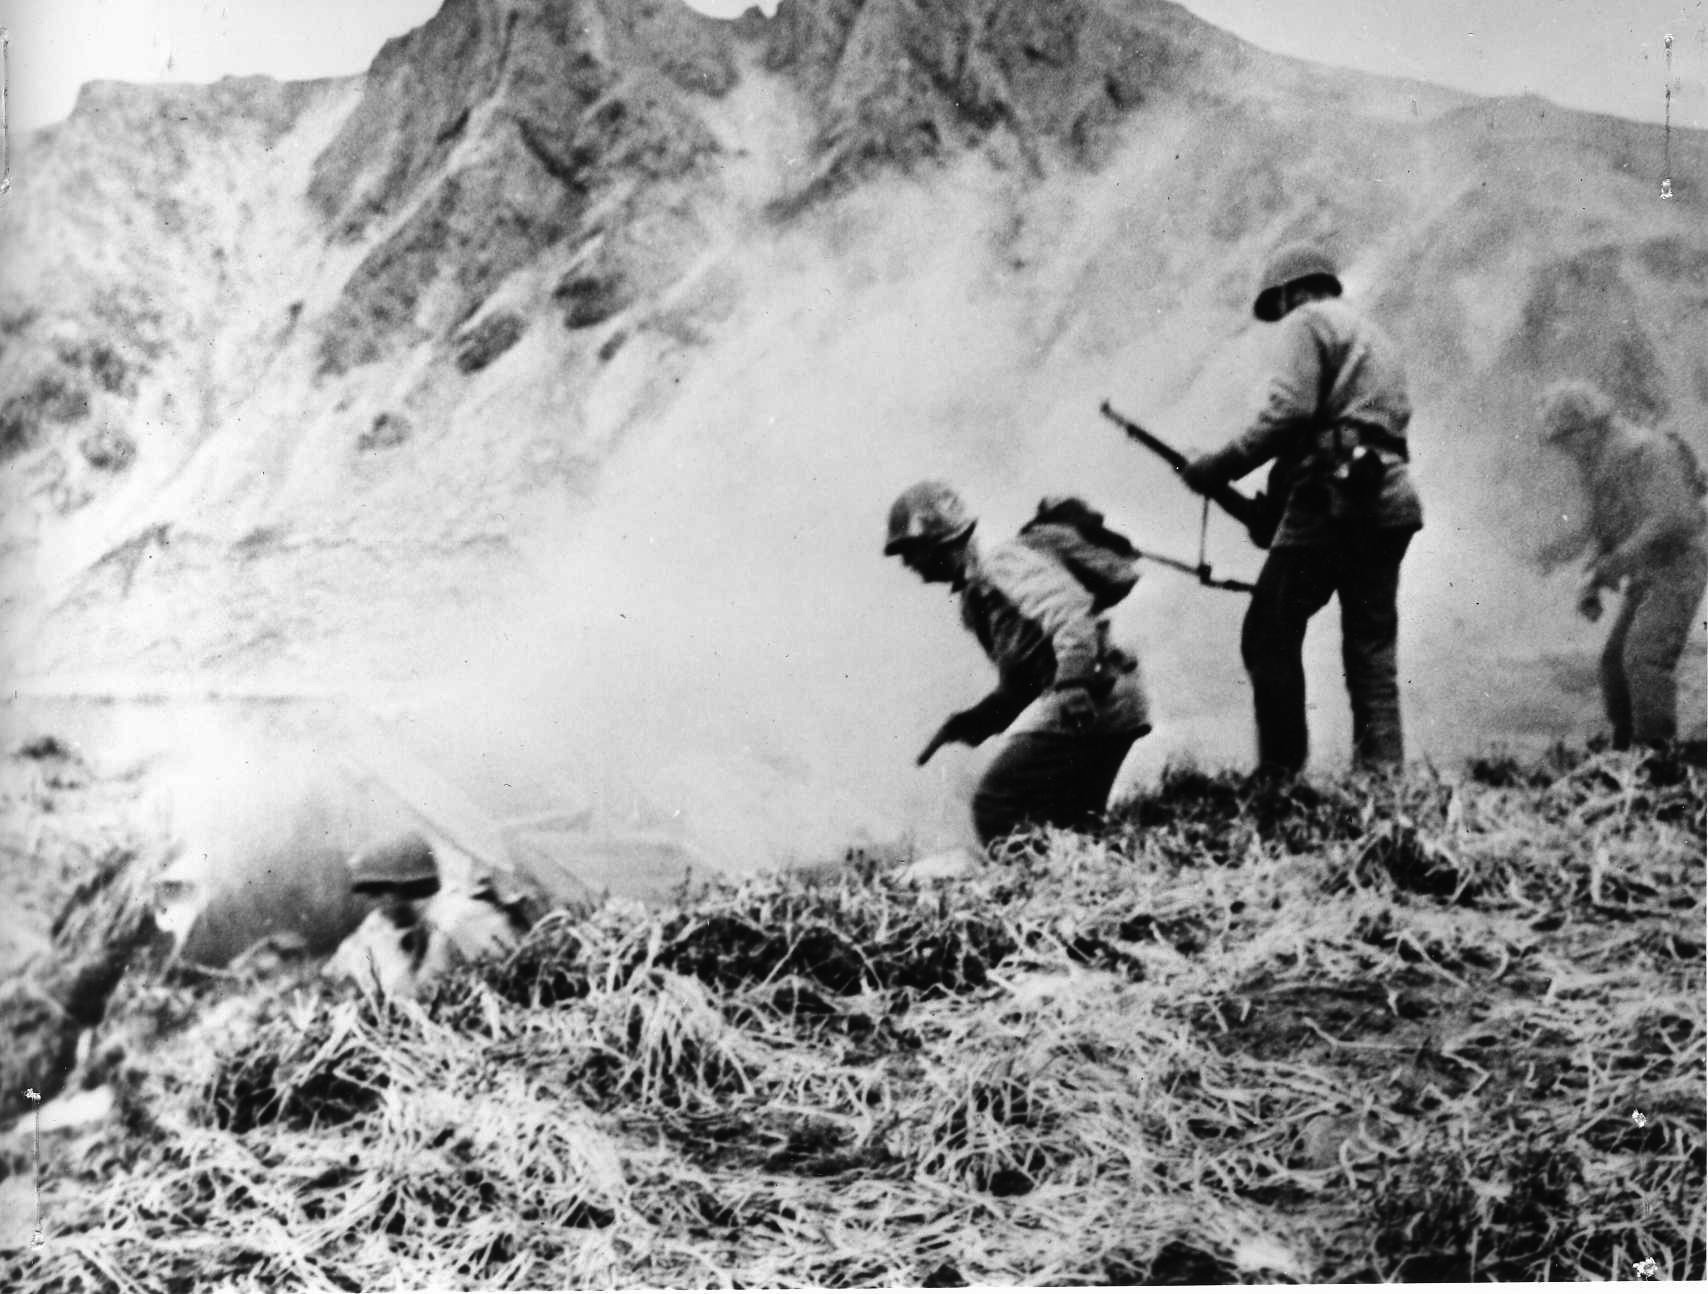 Pushing inland on Attu, Americans had to pry Japanese soldiers from dugouts in the bleak, snow covered-mountains.